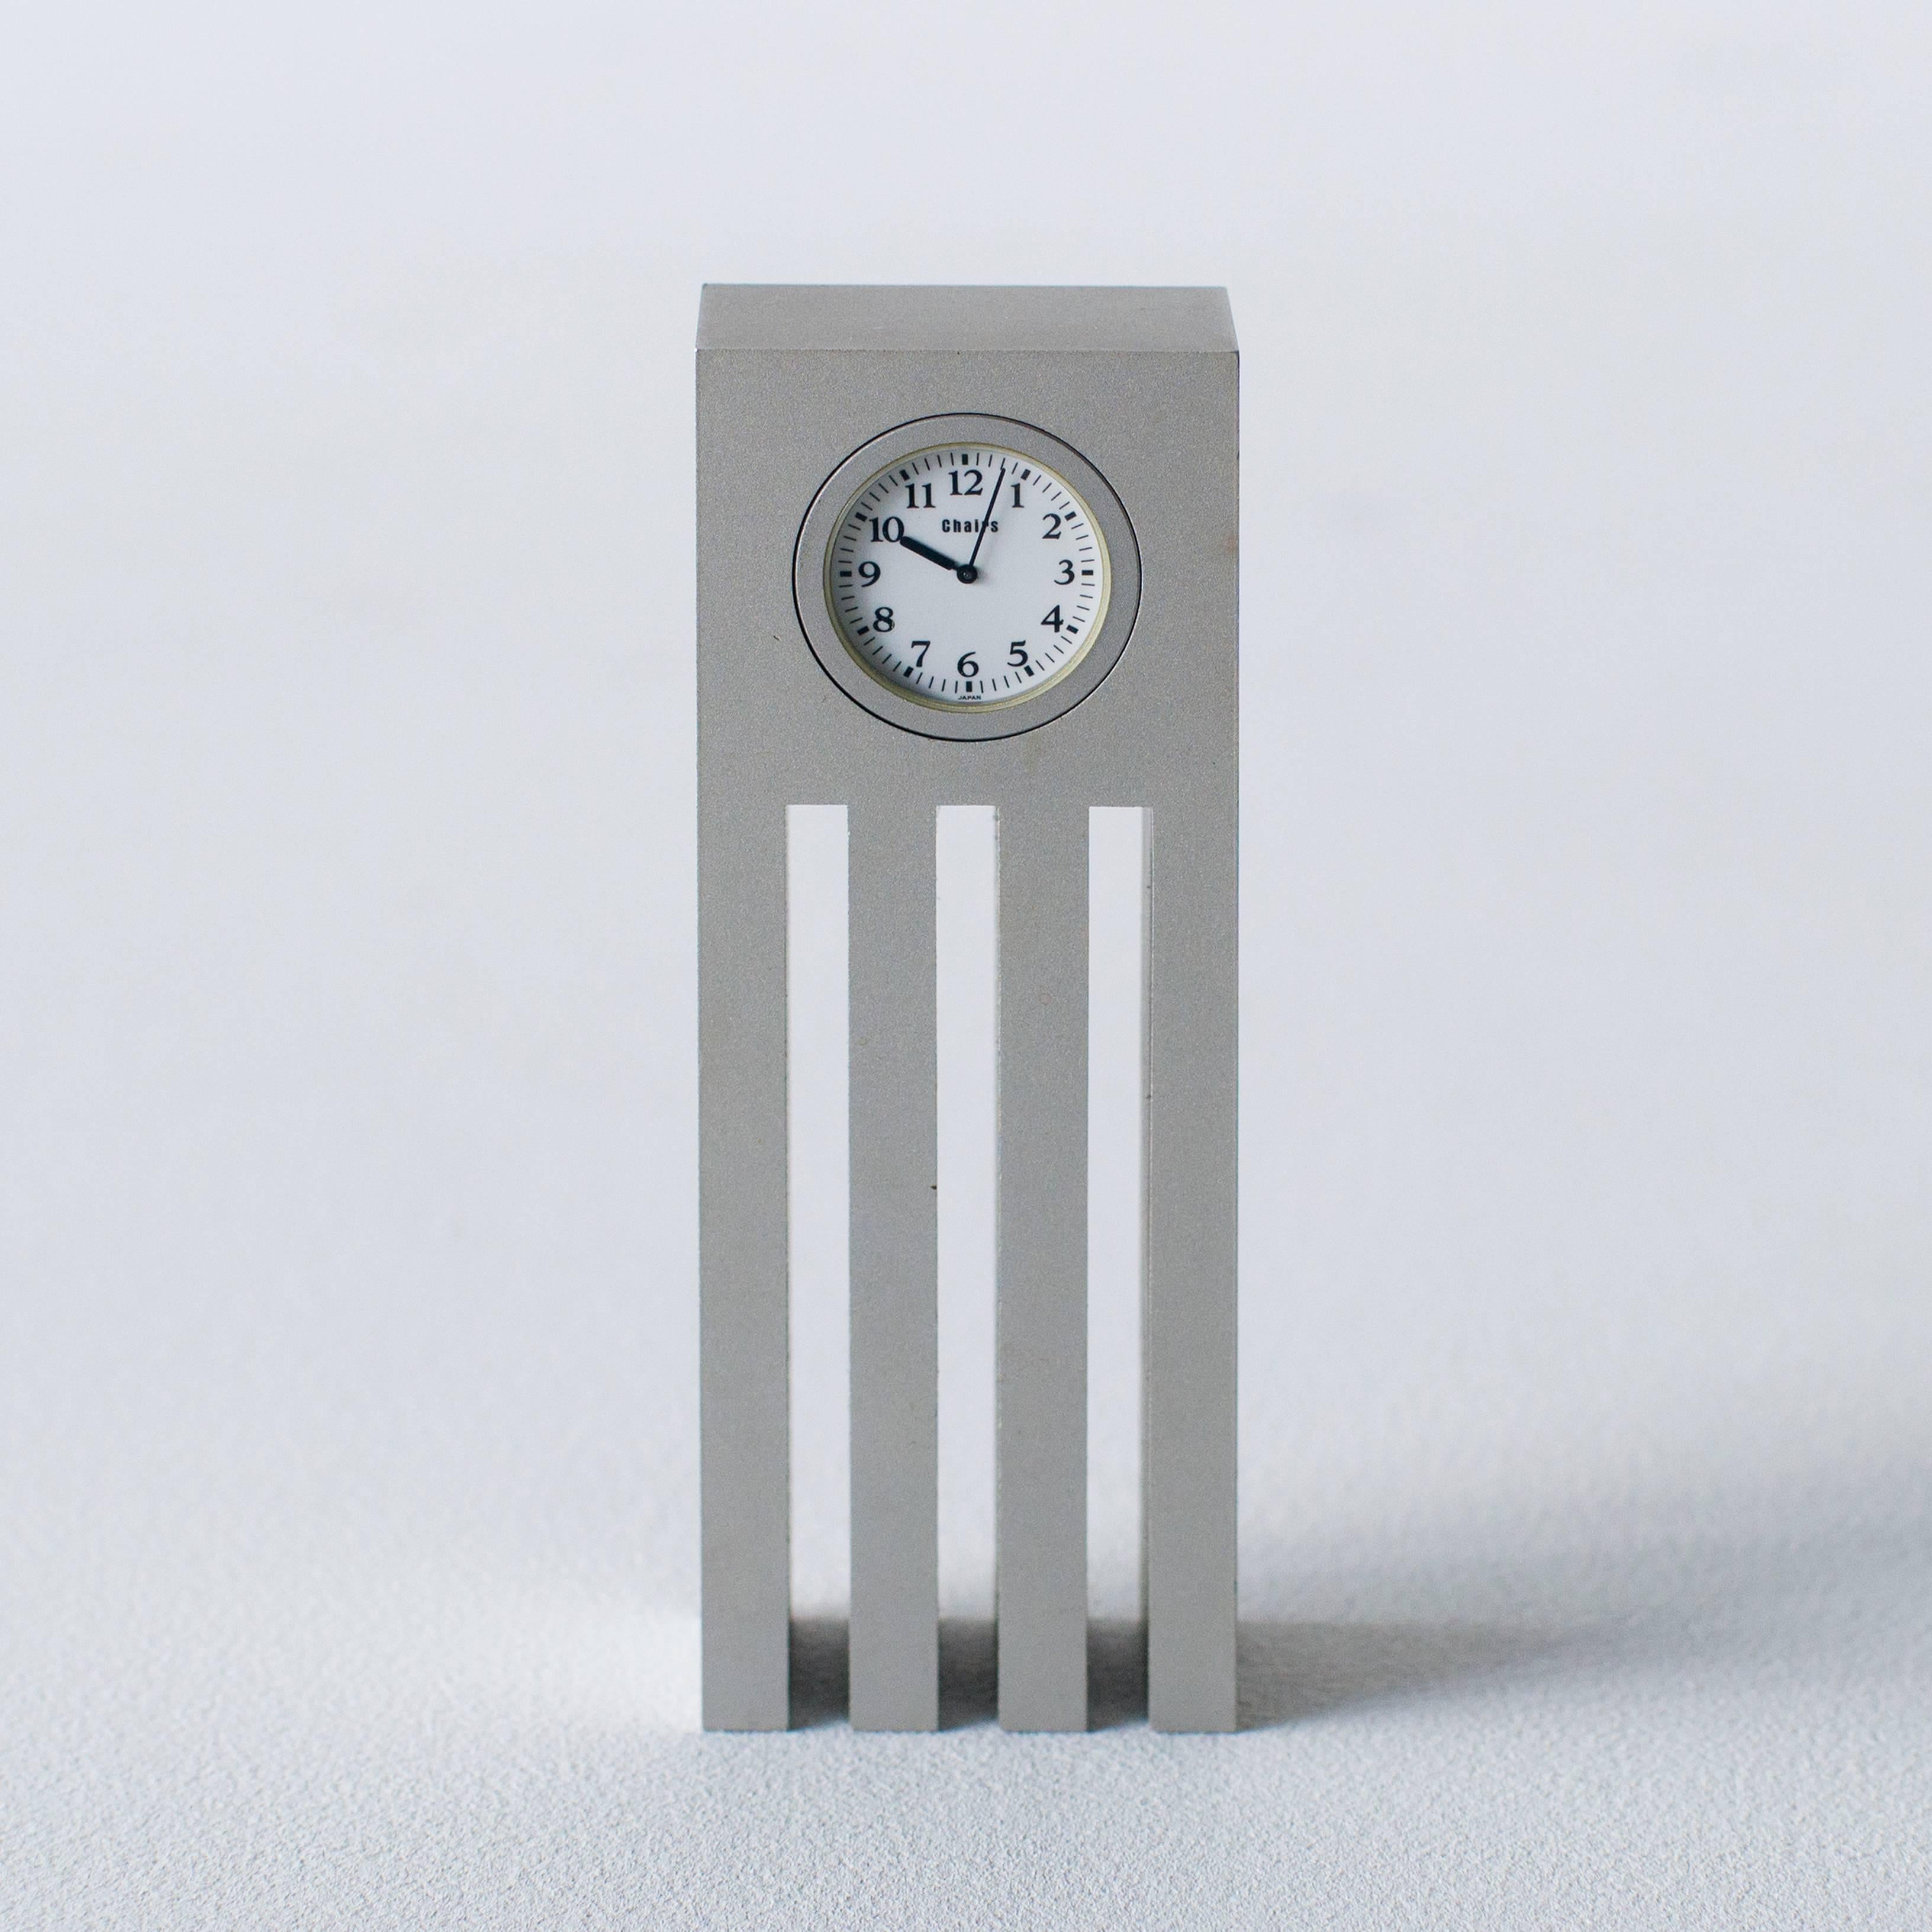 Dear Vera table clock designed by Shigeru Uchida. This table clock is famous as Alessi product. But this model is what his studio released. There is logo 